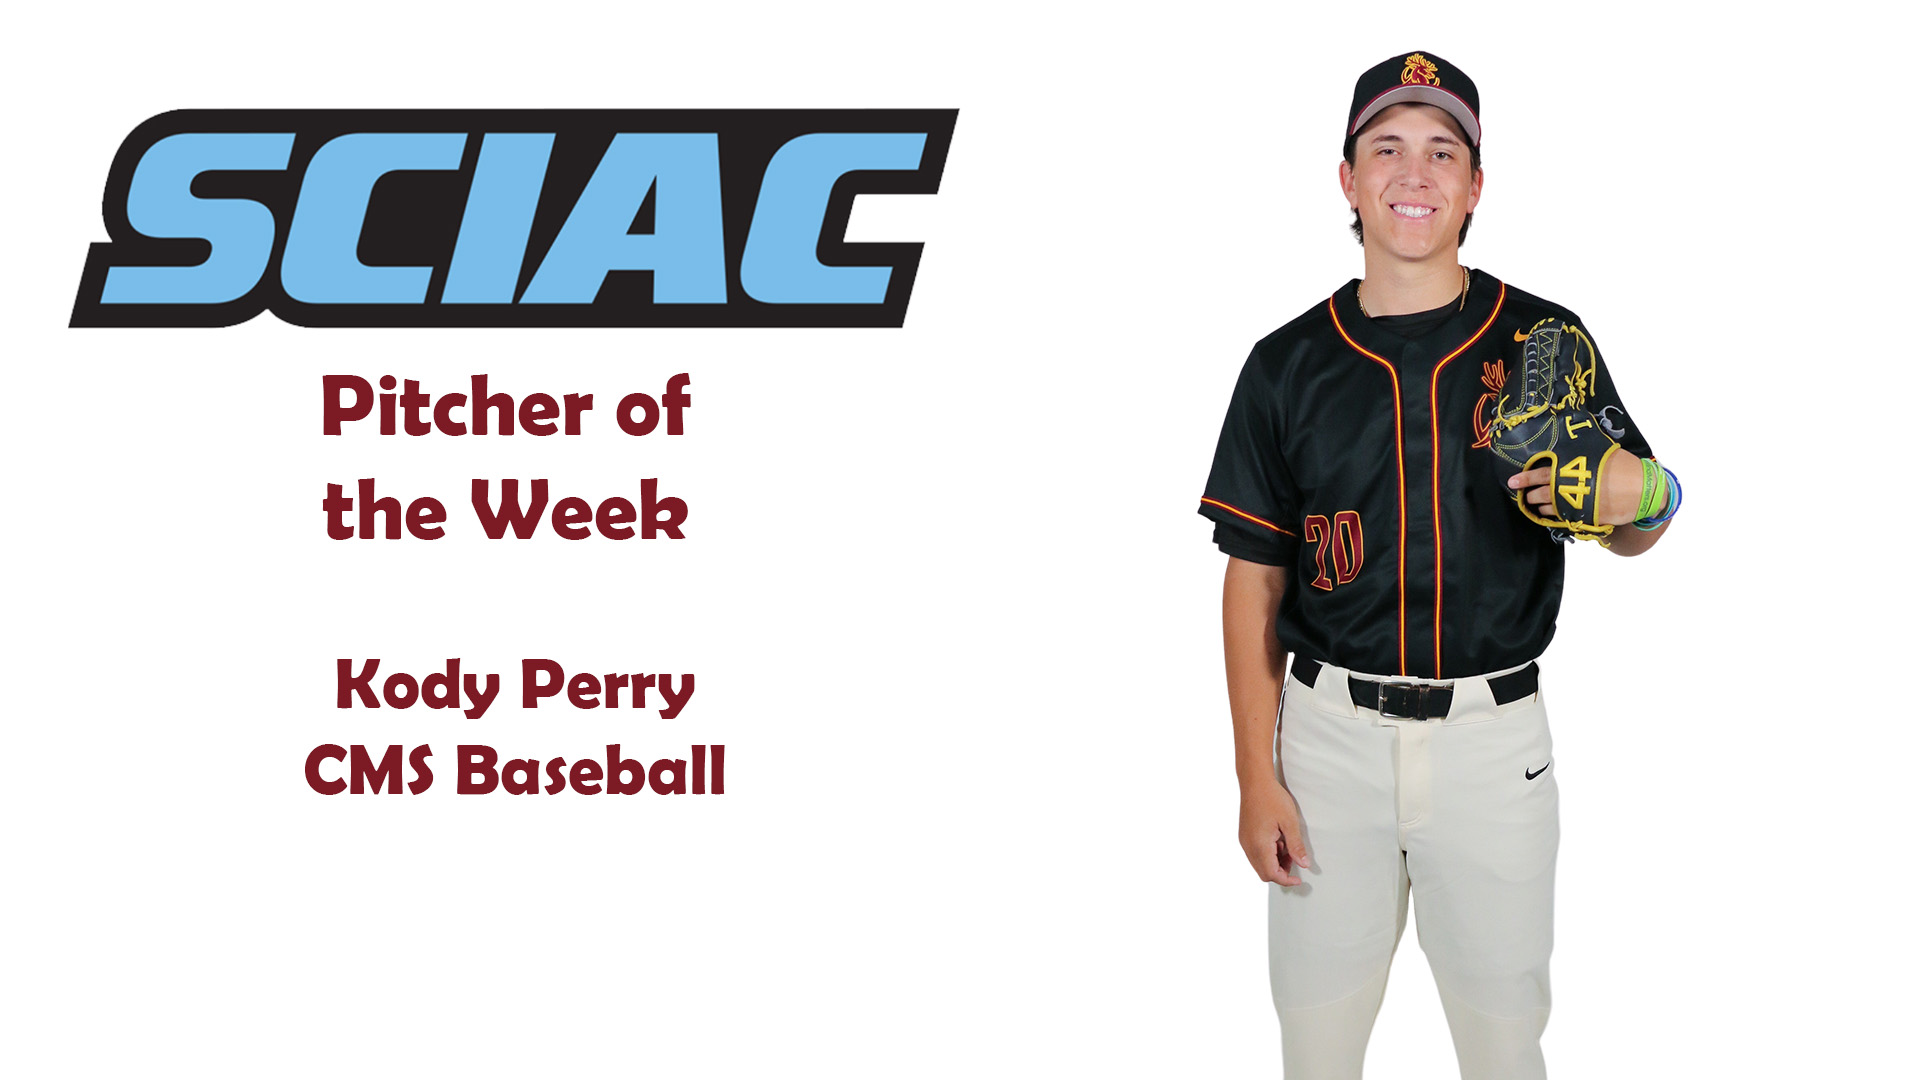 posed shot of Kody Perry with the SCIAC logo